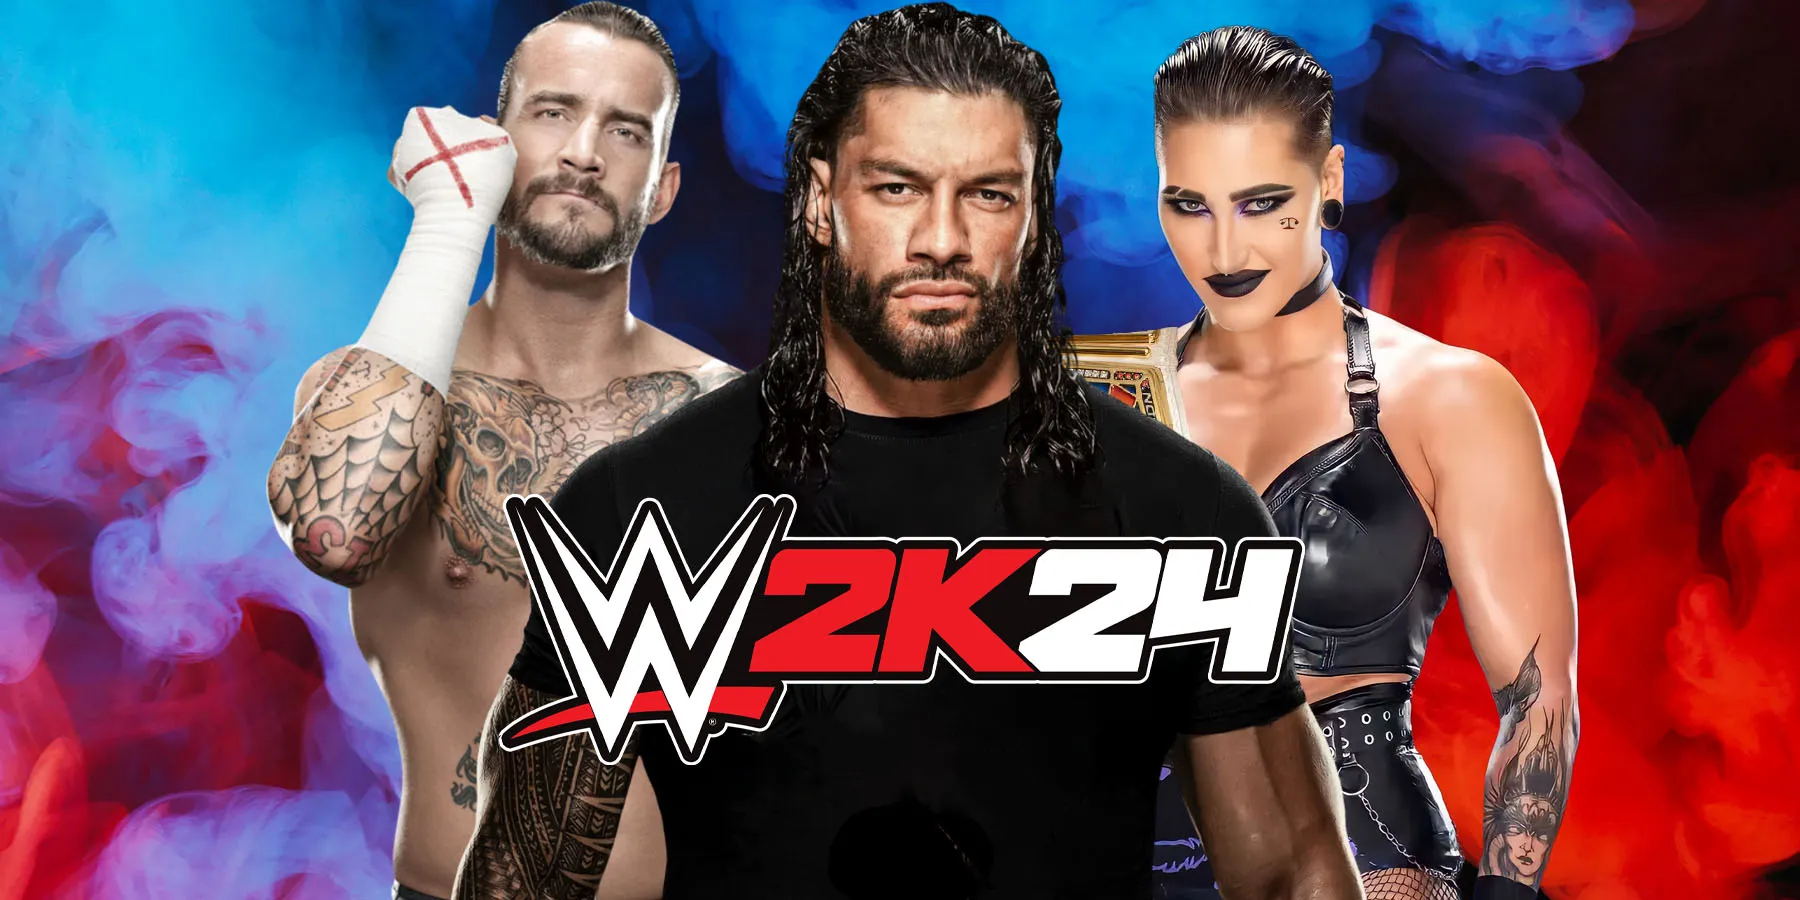 WWE 2K24 Roster LEAKED! Cover Stars, All Superstars, Legends, ECW, NXT